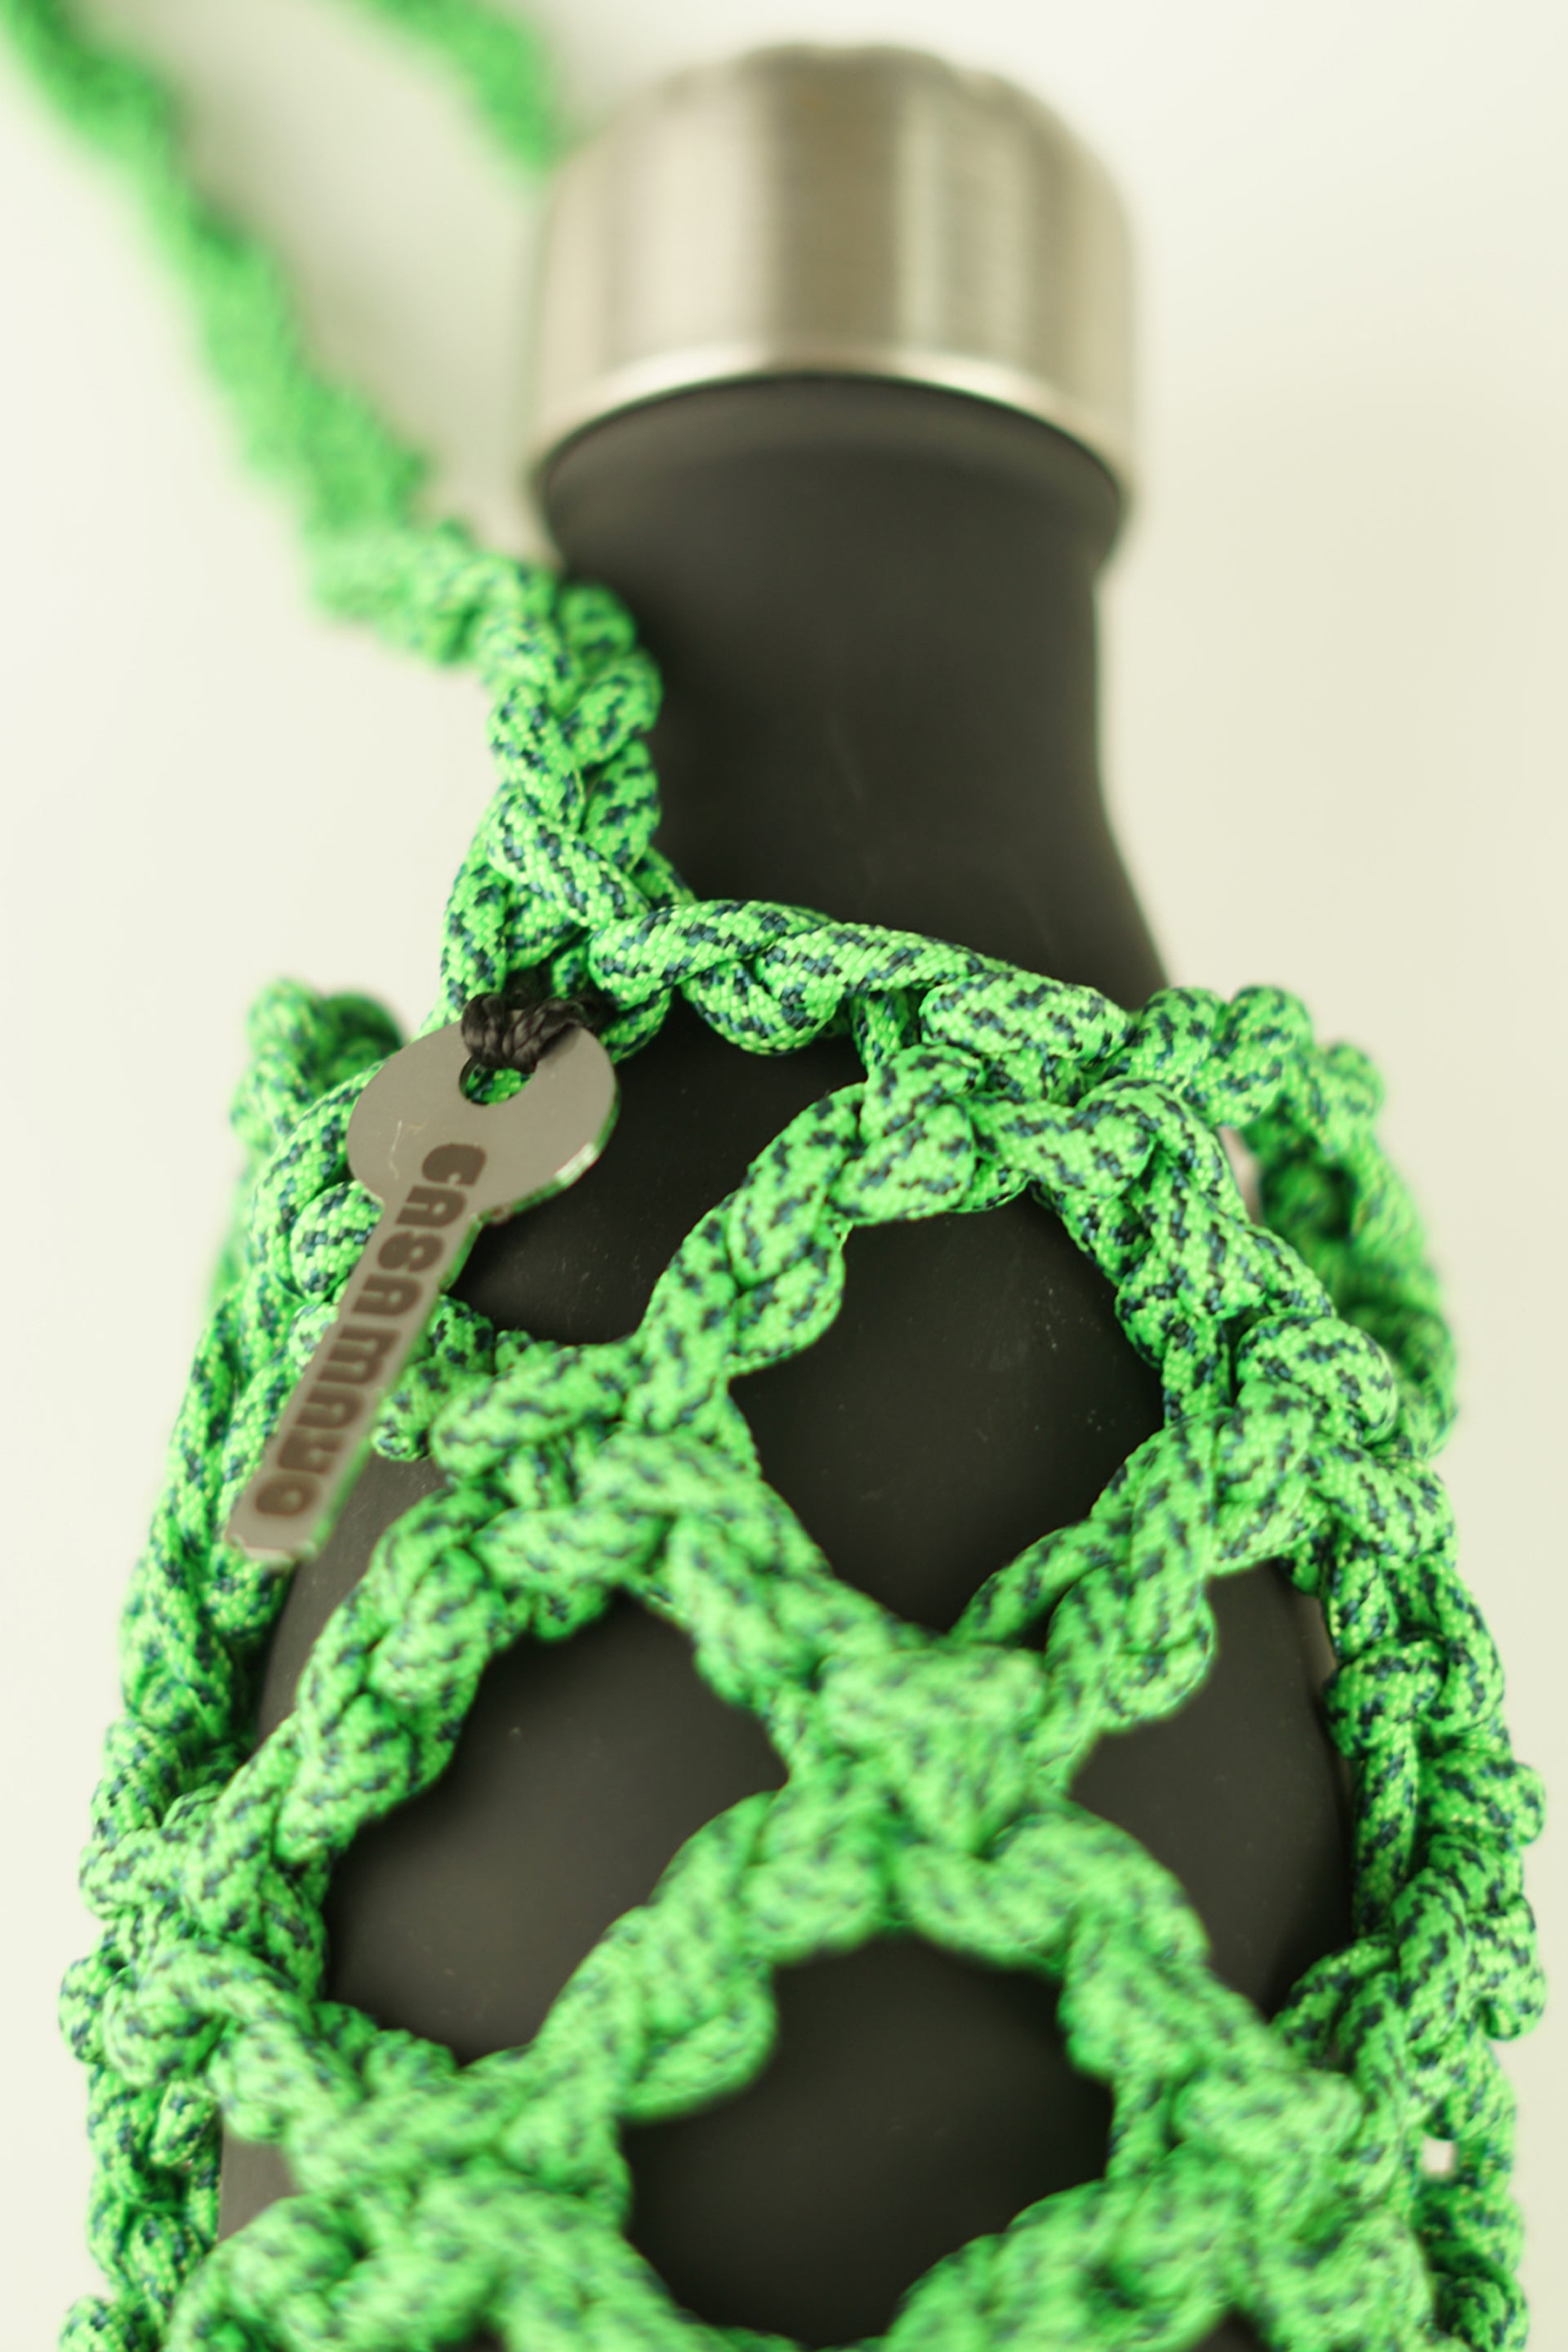 Green bottle carrier made of paracord rope